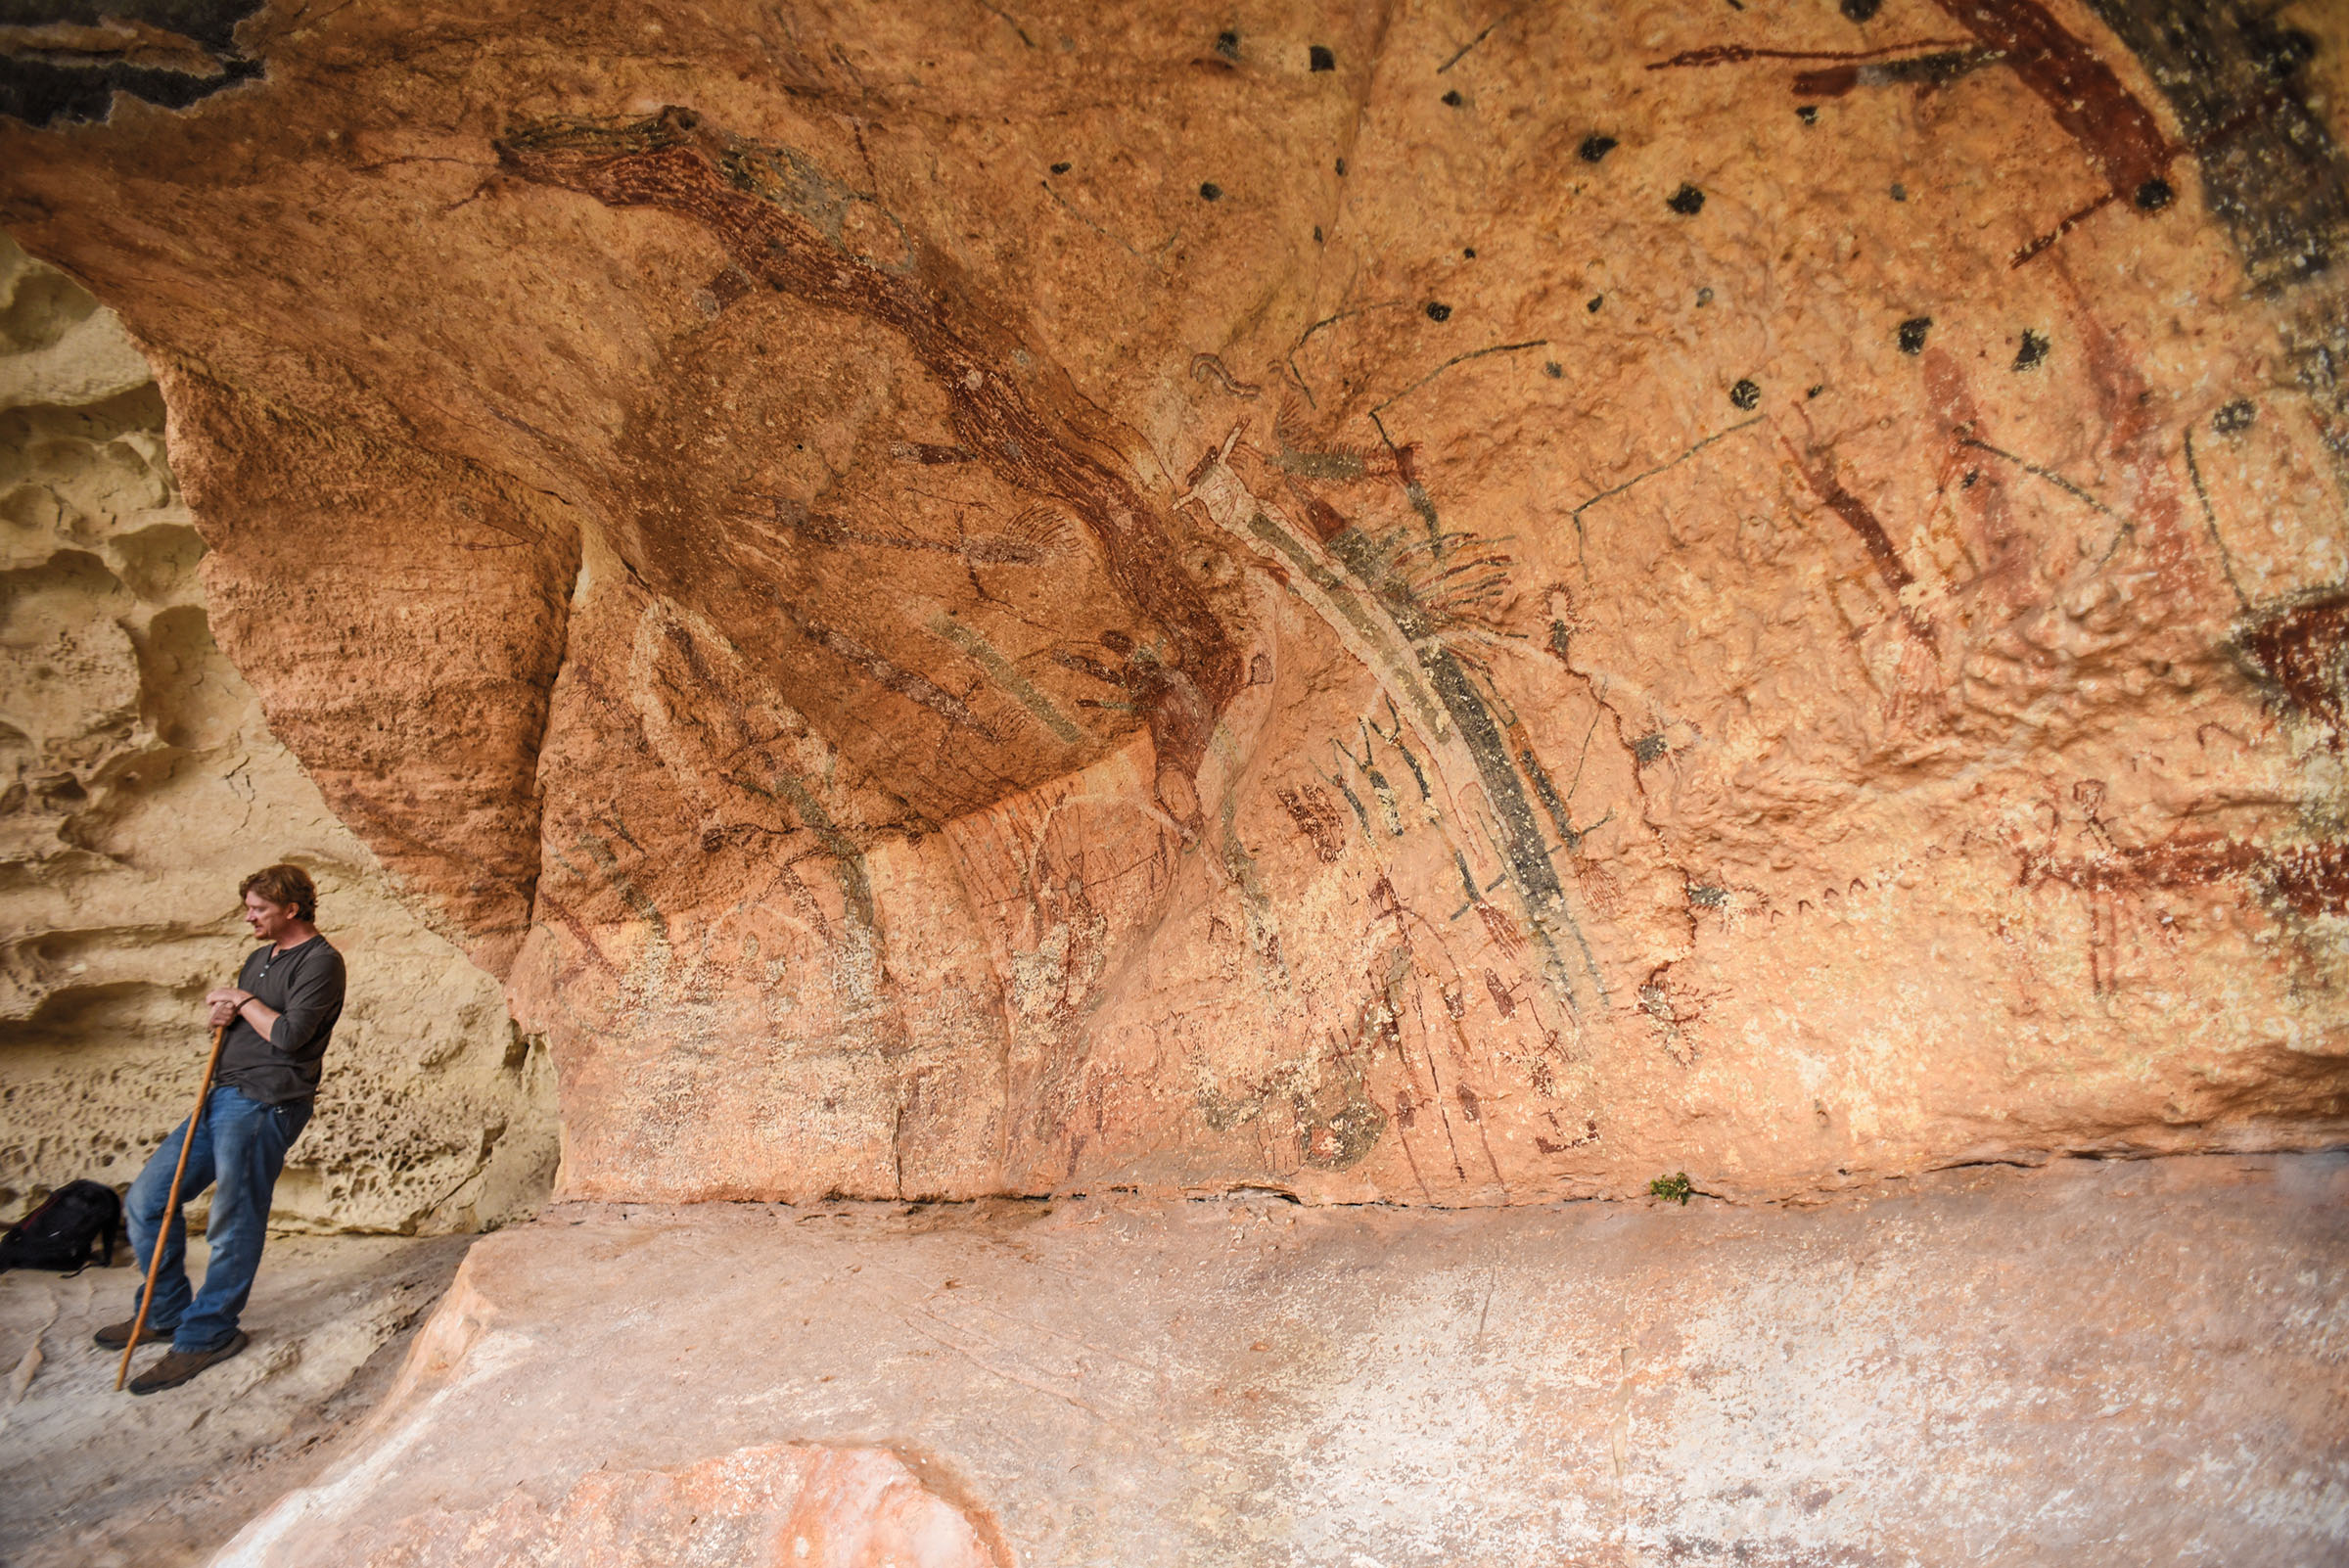 A guide stands next to a reddish rock wall with numerous cave drawings